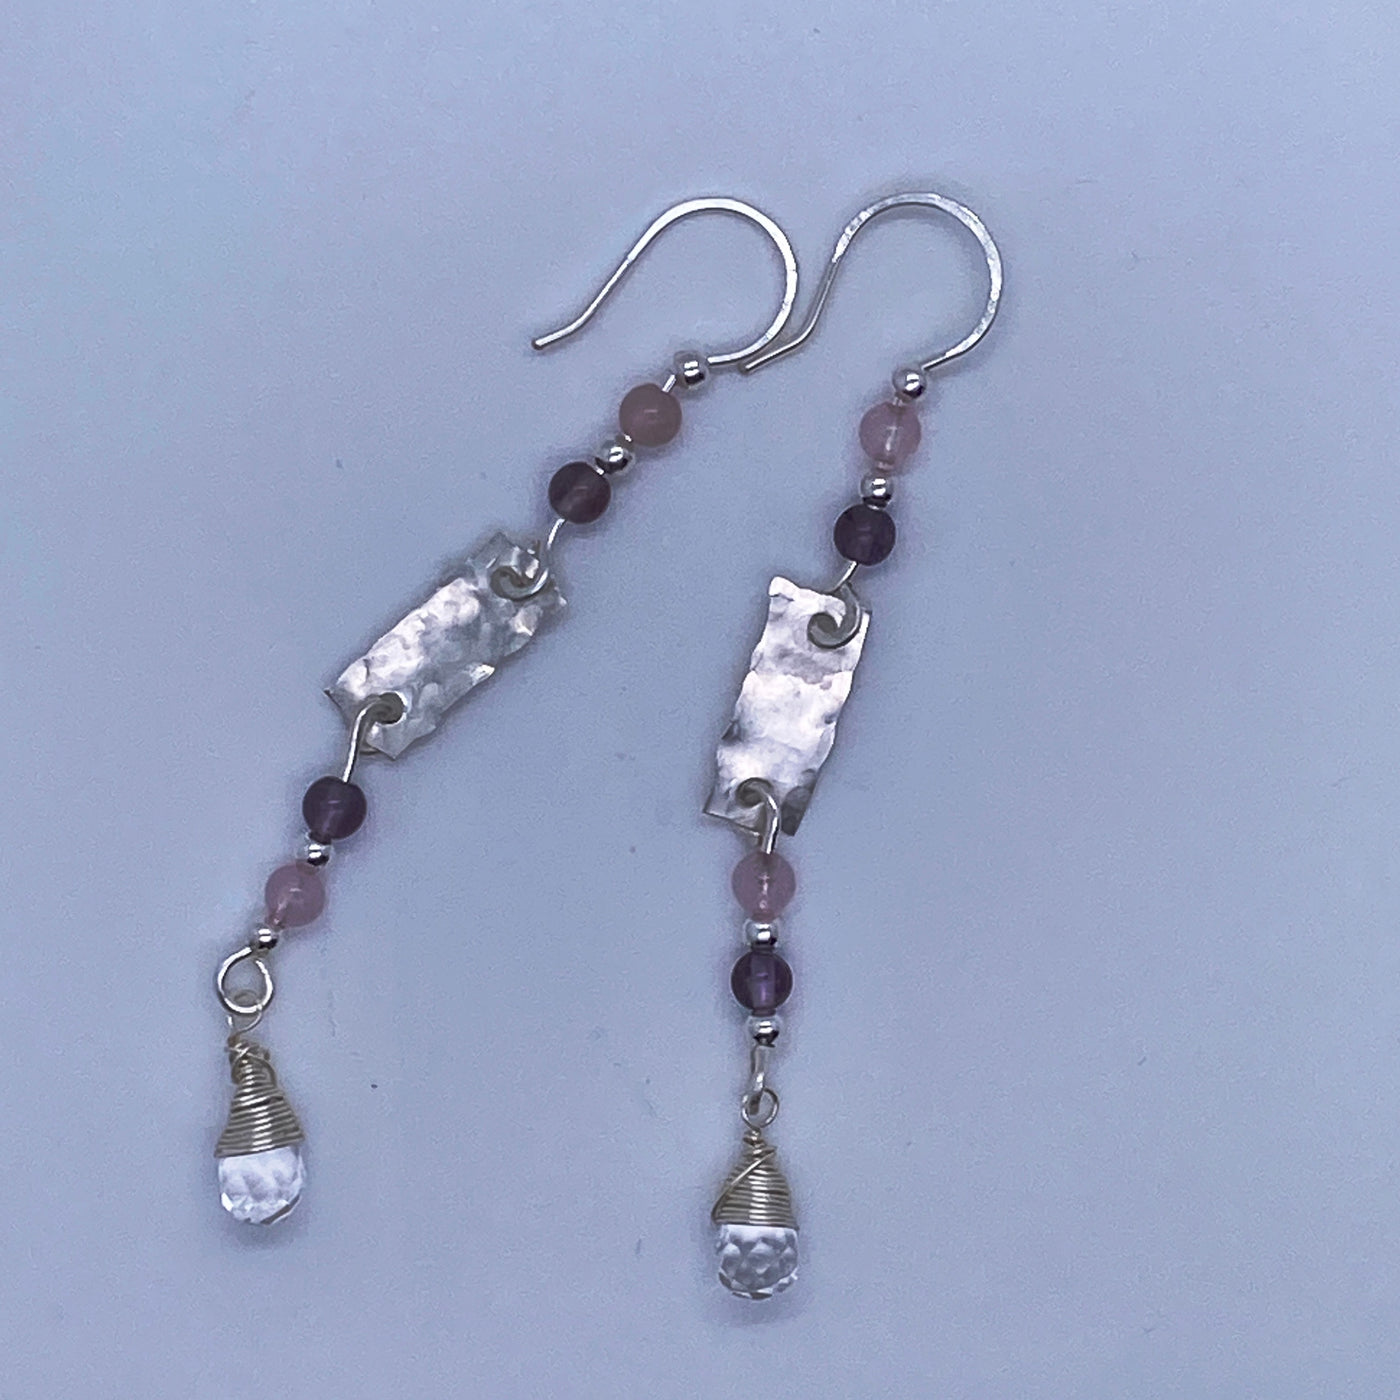 Silver earrings with amethyst, rose quartz and Chrystal briolette.